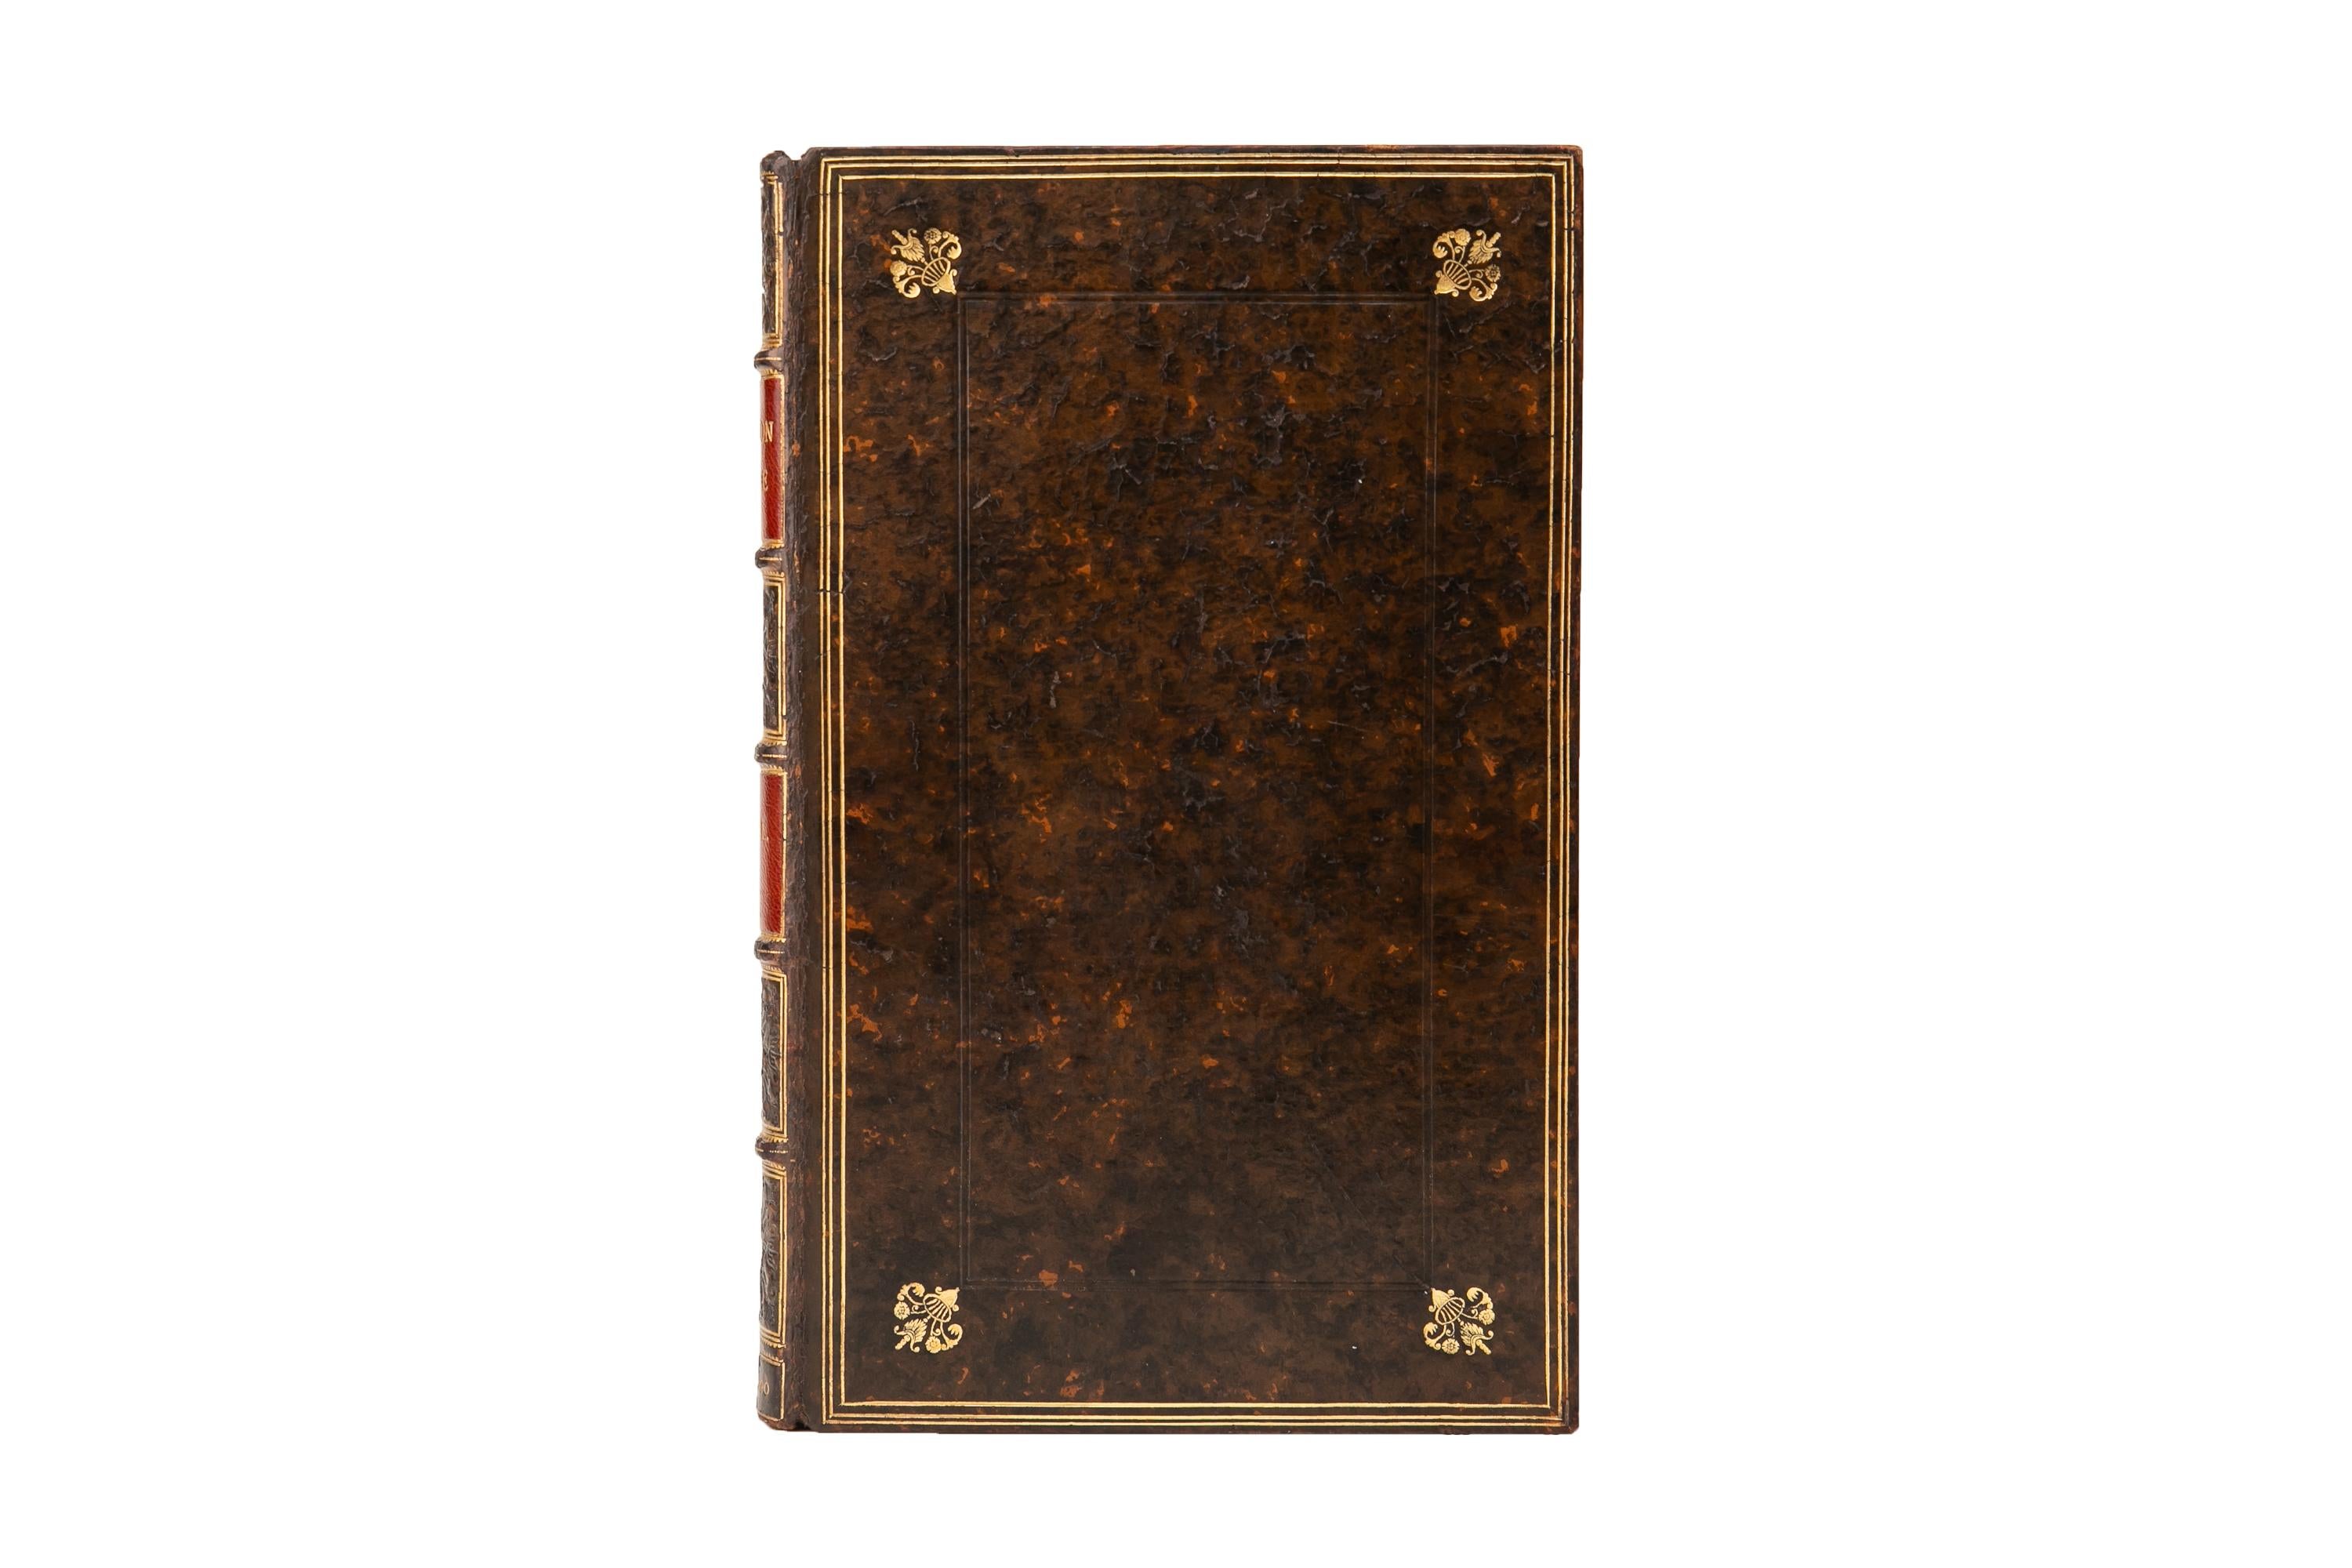 2 Volumes. Daniel Defoe, Robinson Crusoe. Bound by Morrell in full marbled calf. The covers and raised band spines display gilt-tooling with brown morocco labels. All the edges are gilt with gilt-tooled dentelles. Includes a Life of the Author by